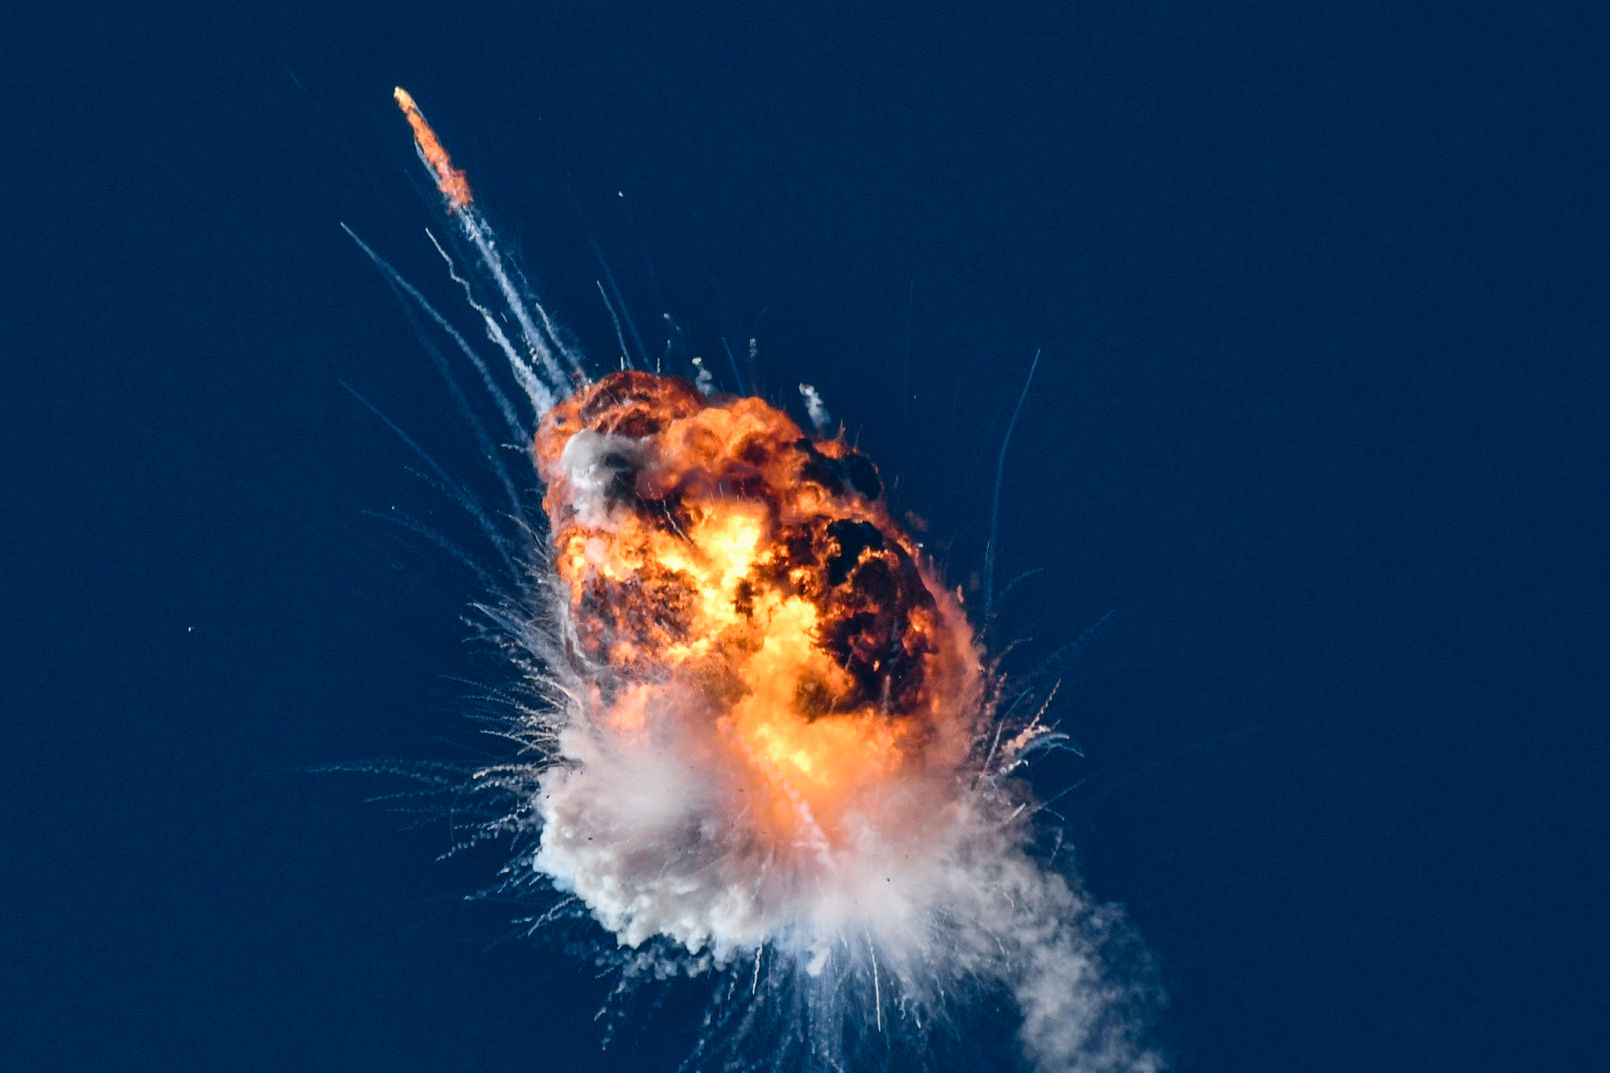 Rocket ‘terminated’ over Pacific Ocean in an explosive fireball